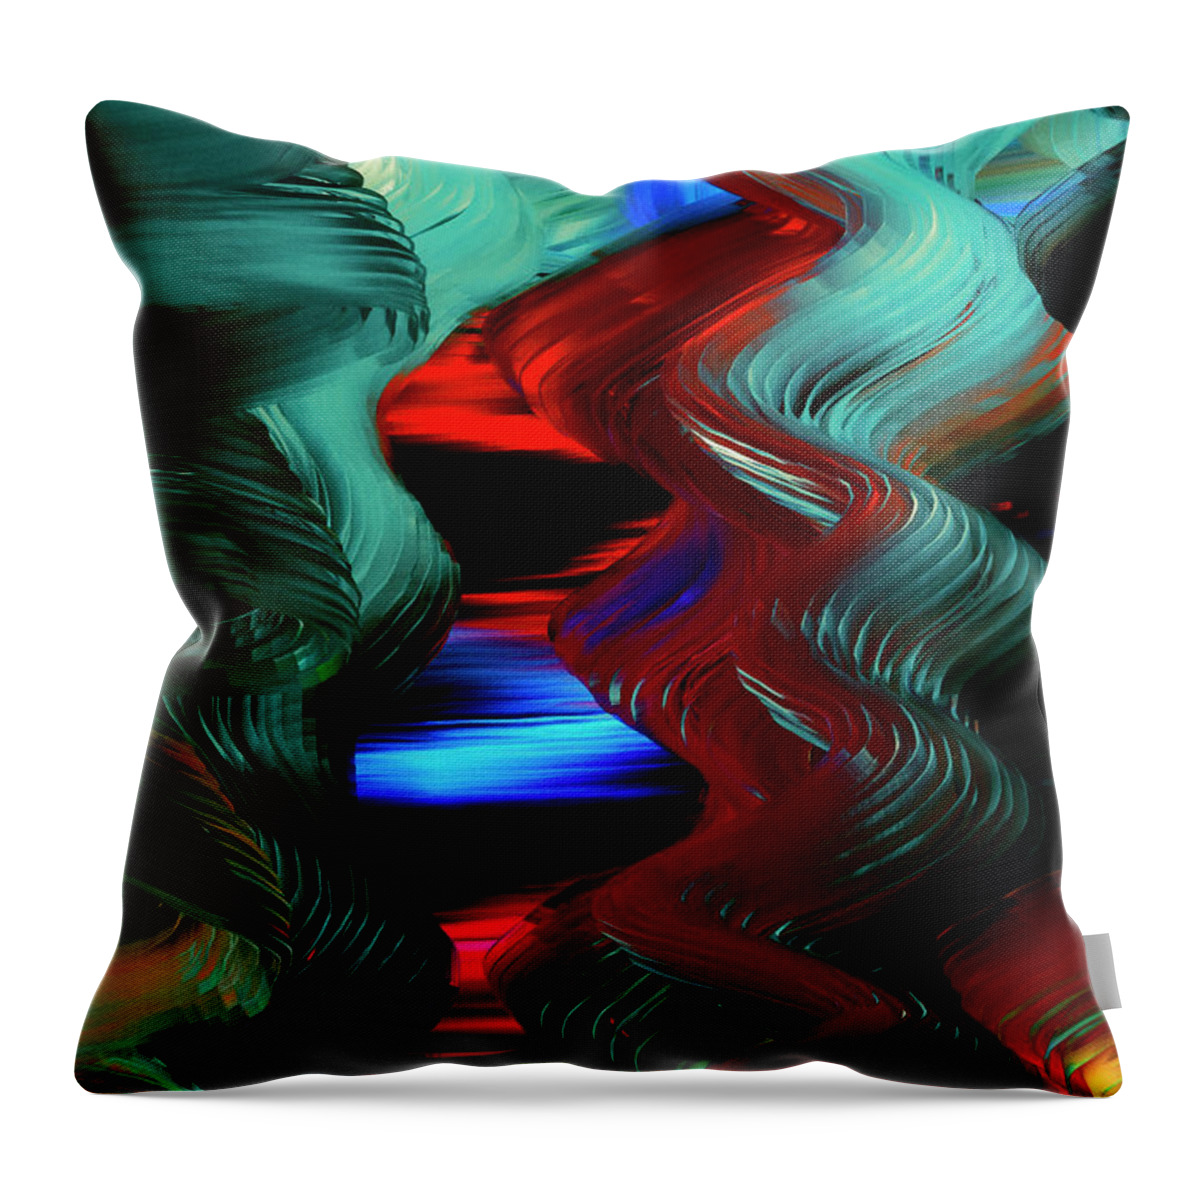 Abstract Throw Pillow featuring the digital art Flight of the Imagination by Gerlinde Keating - Galleria GK Keating Associates Inc